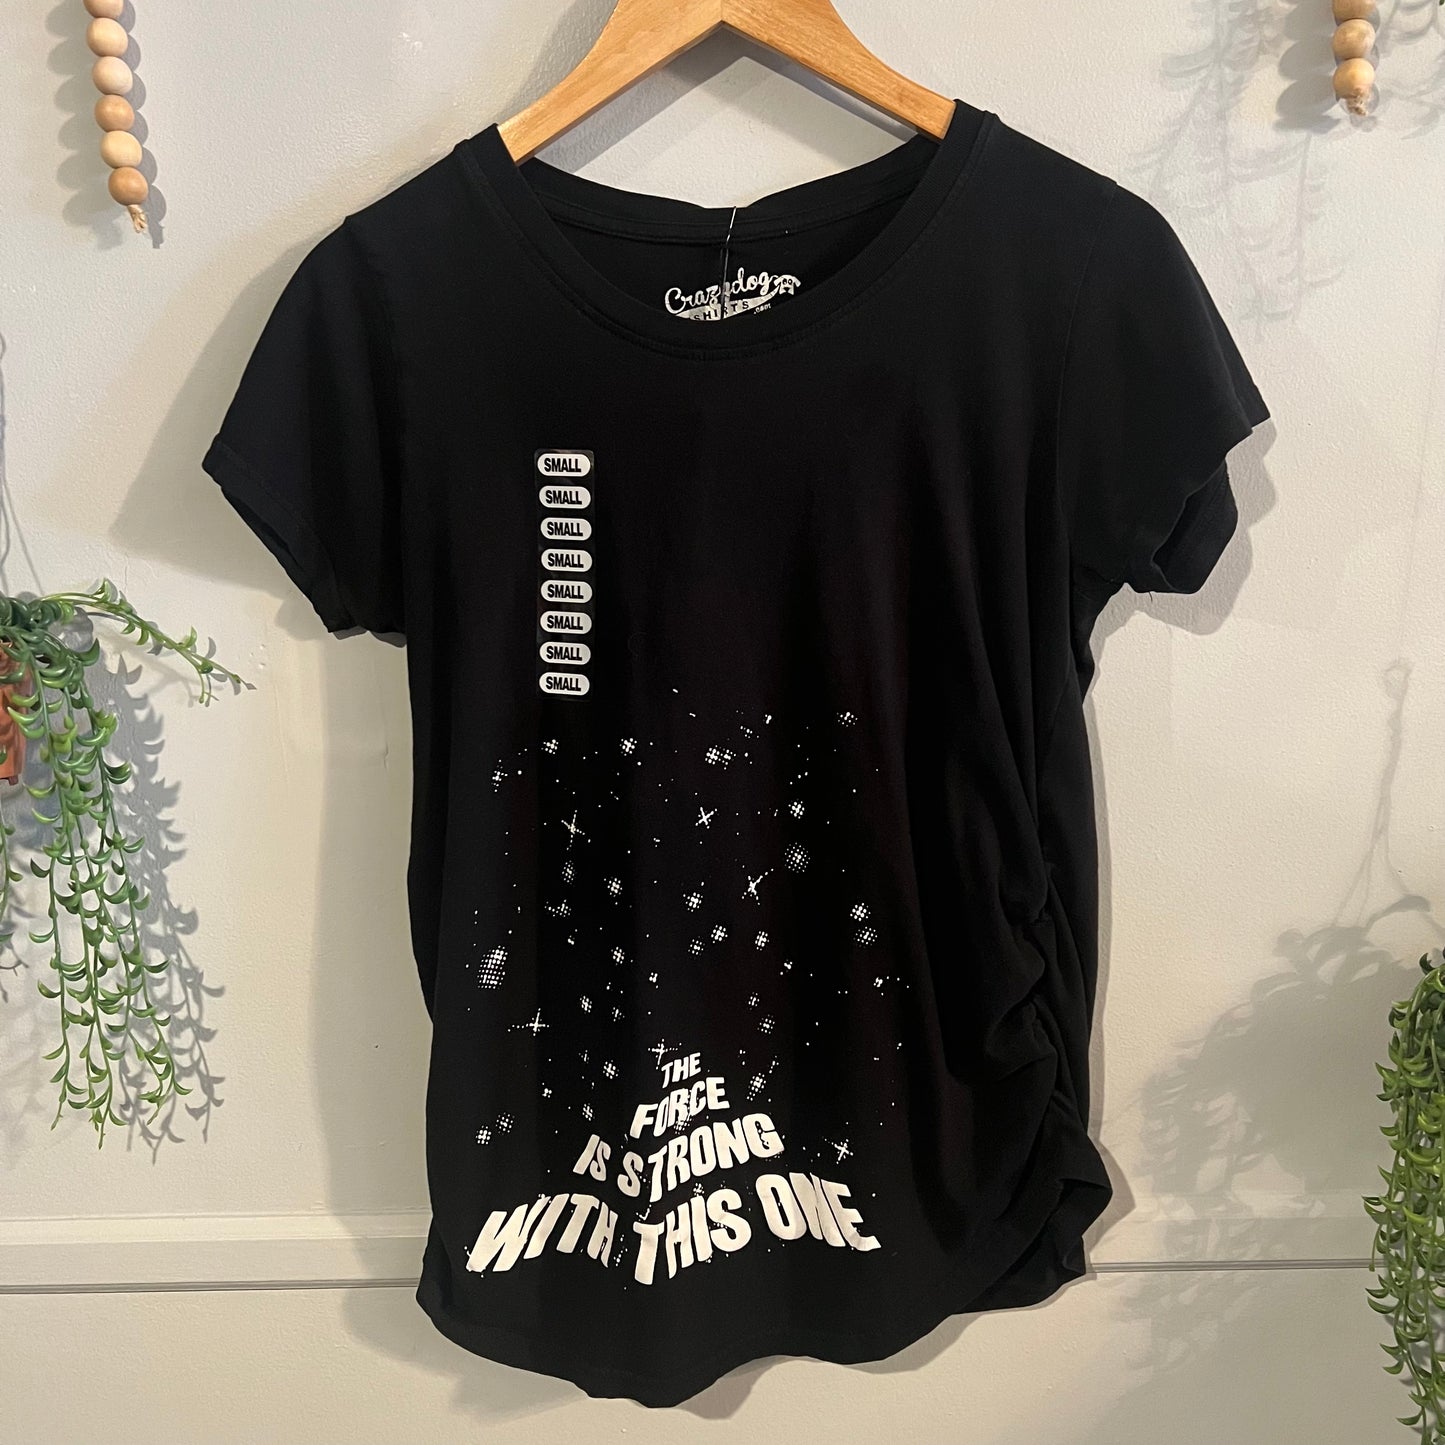 'The Force is Strong with This One' SS graphic tee, Black